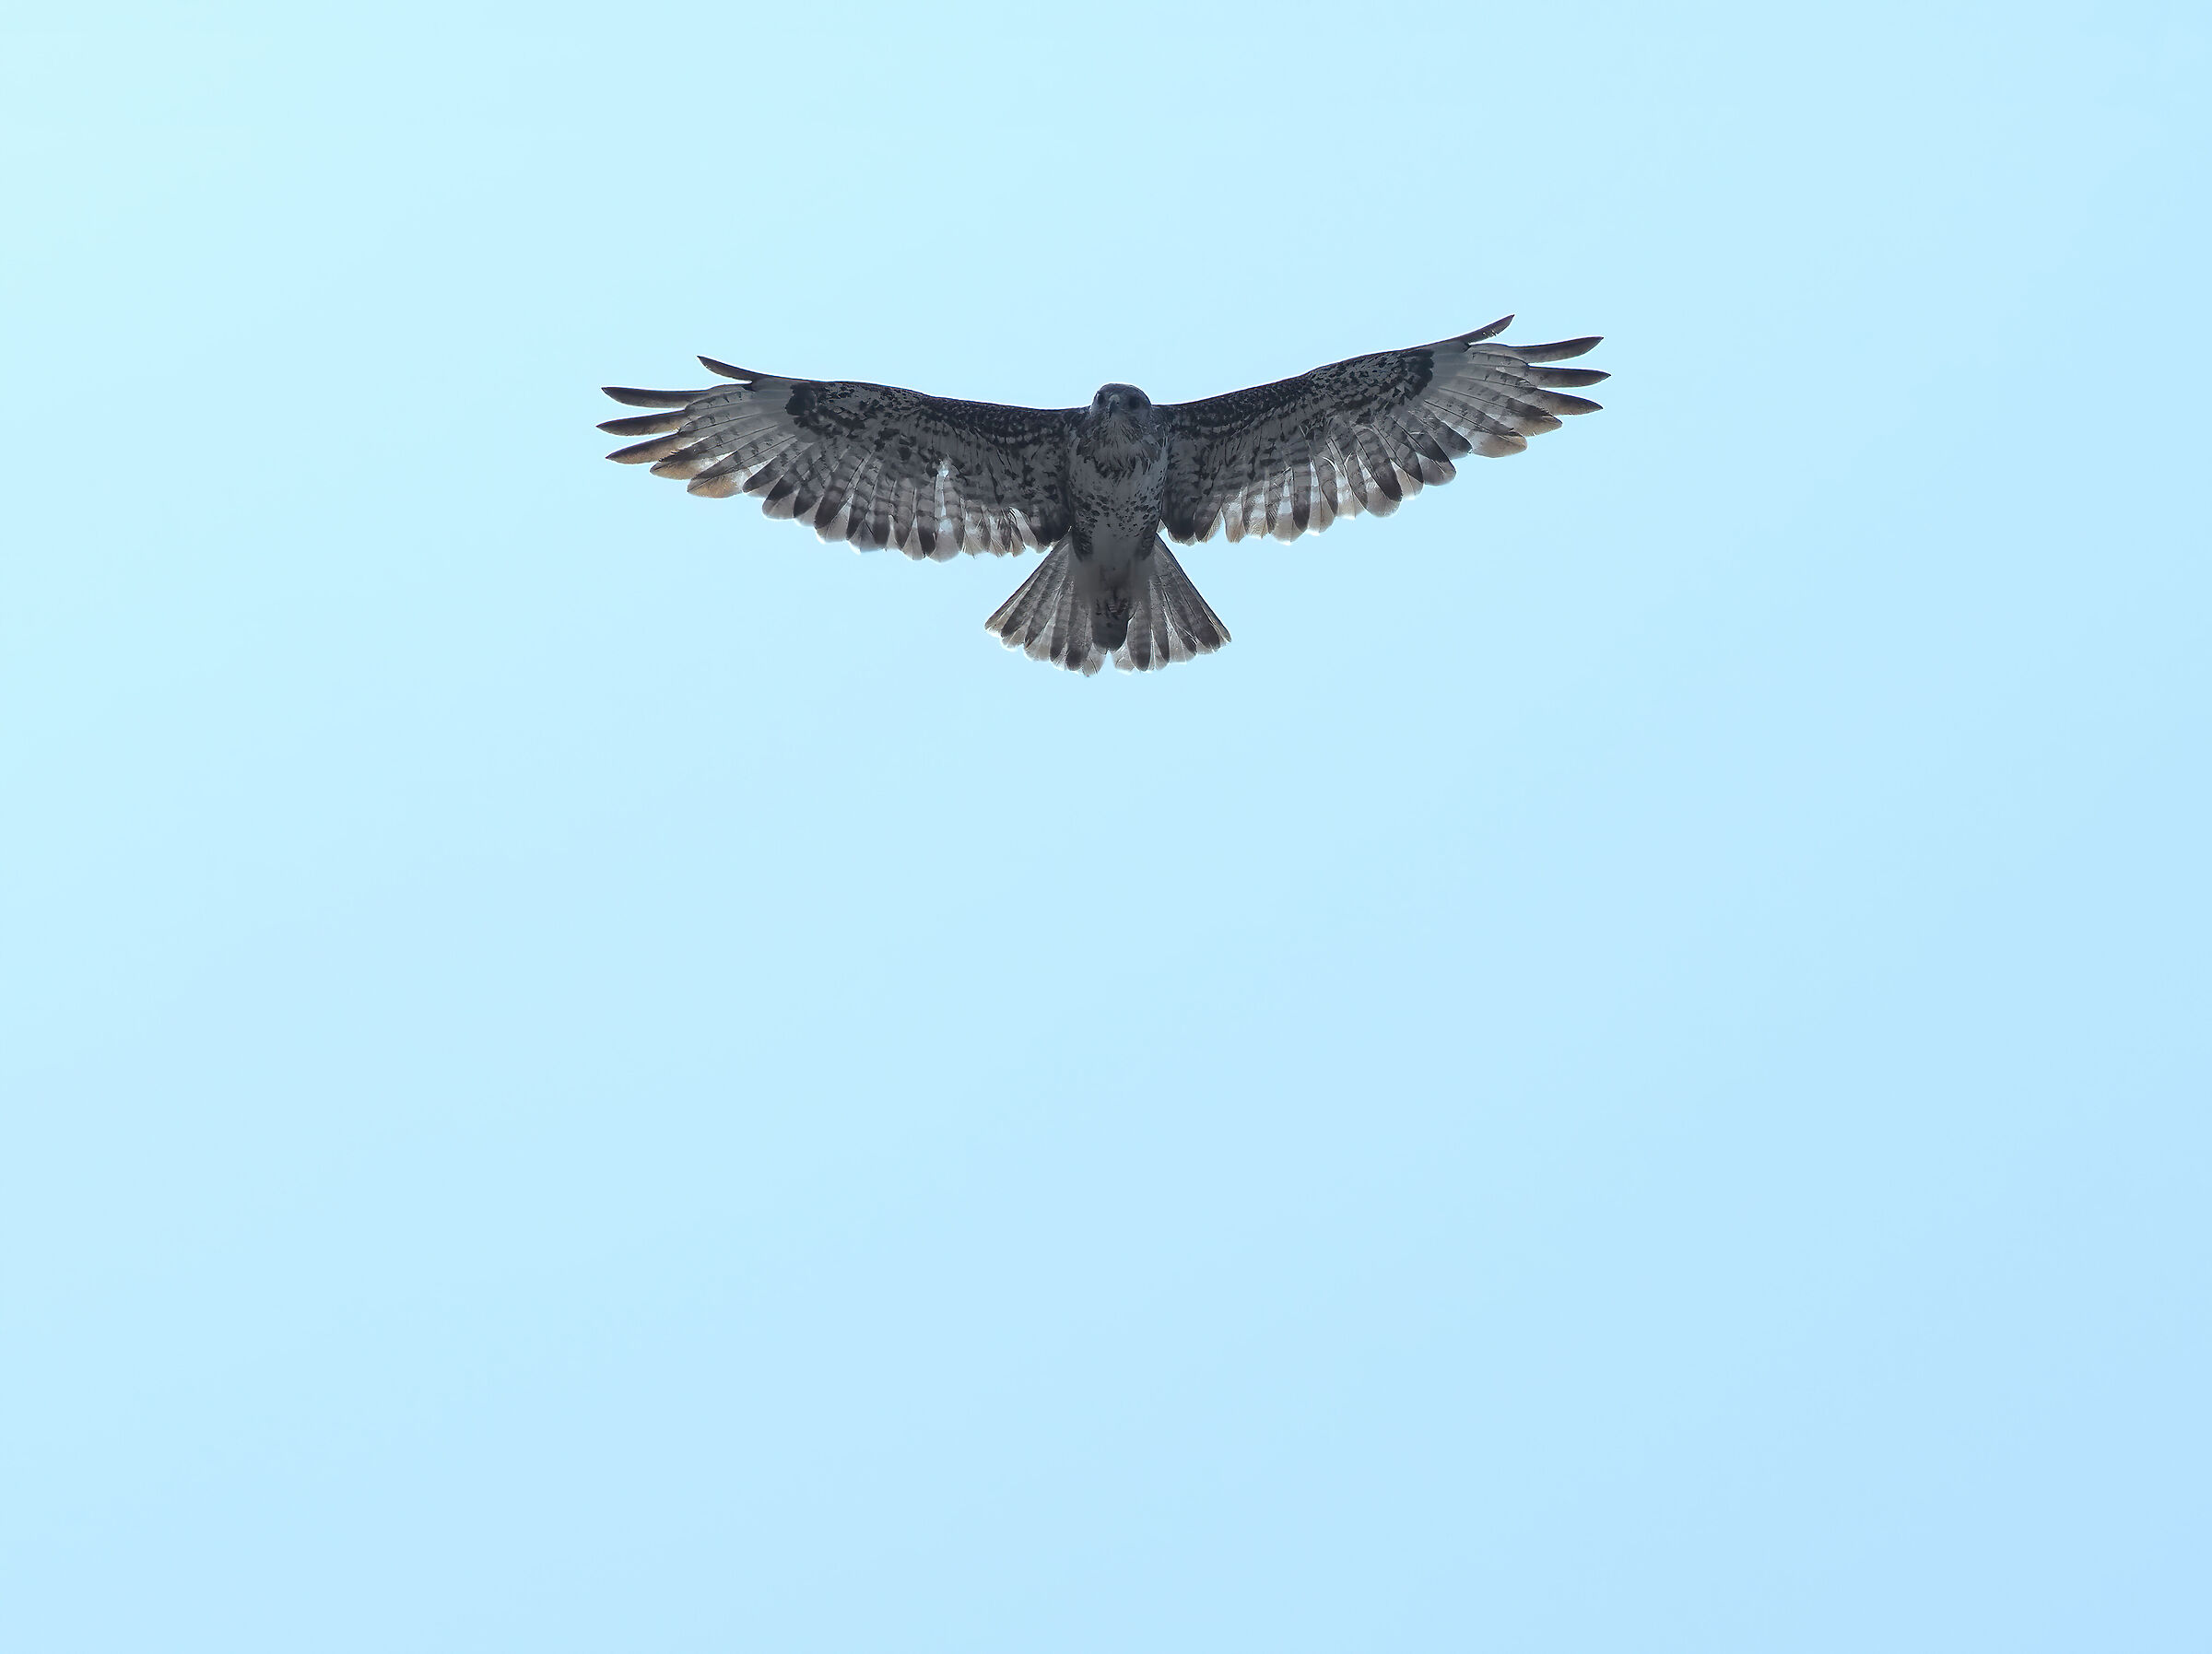 The flight of the young sicula eagle of Bonelli...